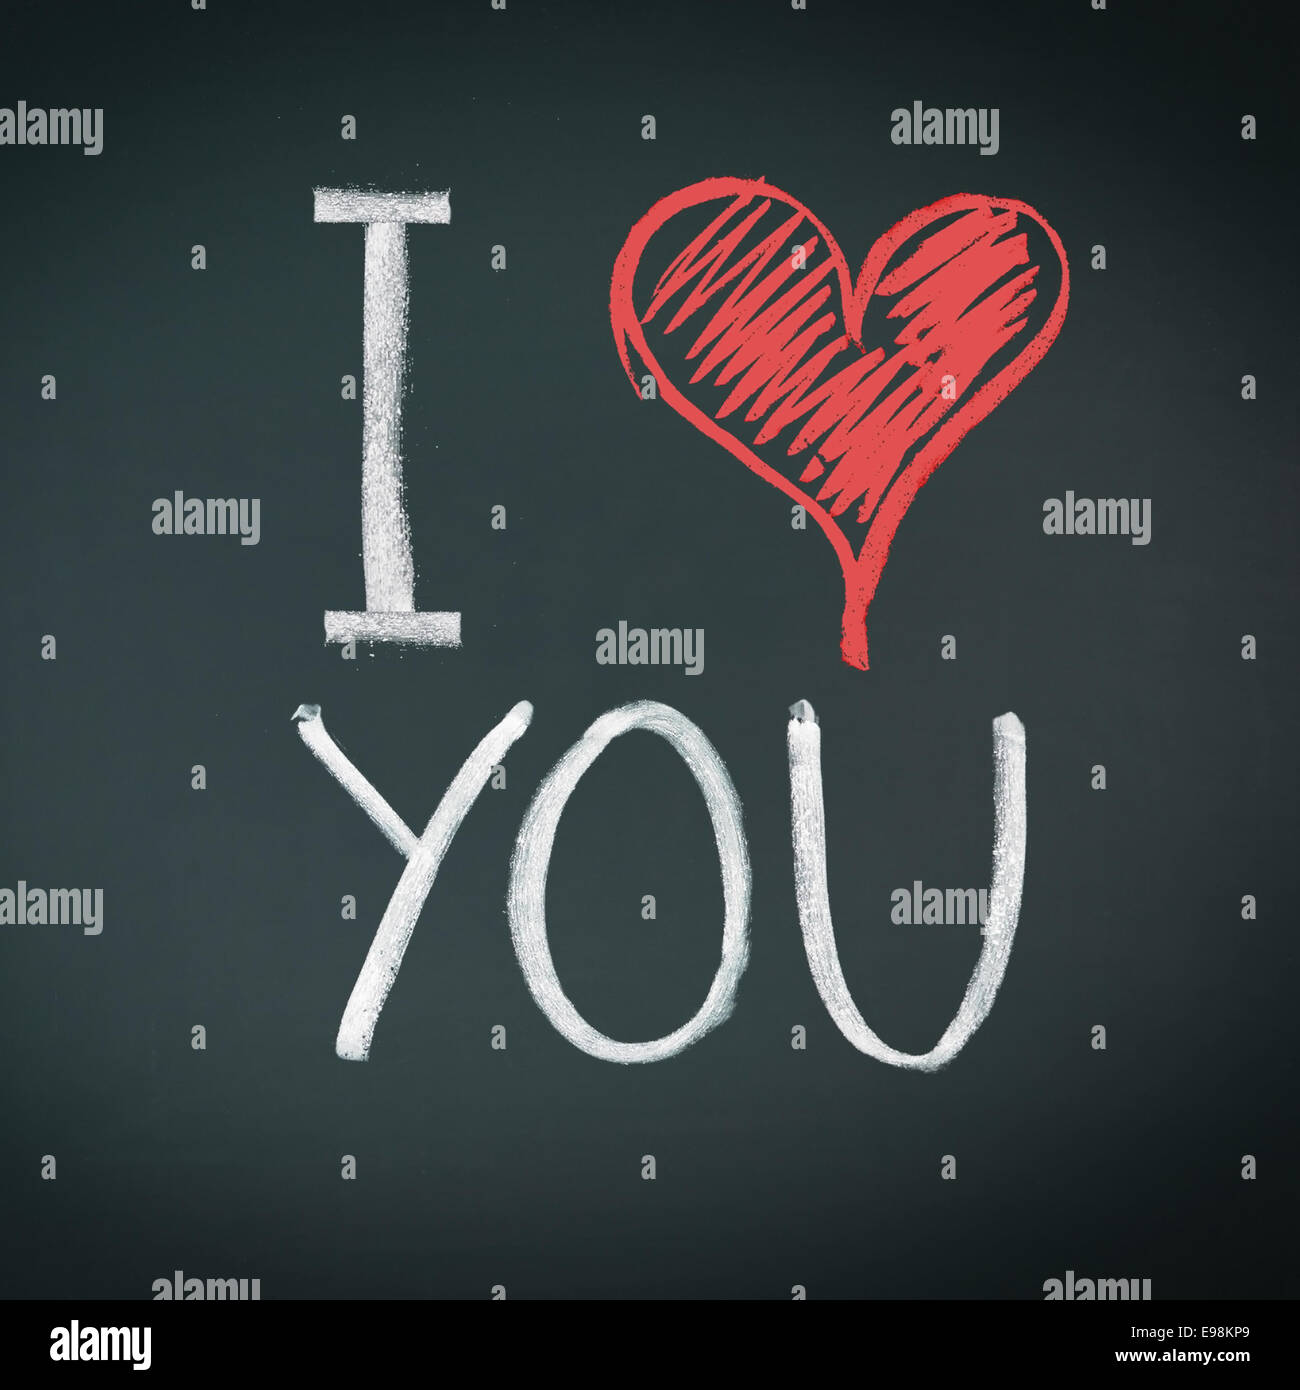 I Love You. Handwritten message on a chalkboard with an illustrated heart used as a symbol of love in this Valentines message. Stock Photo